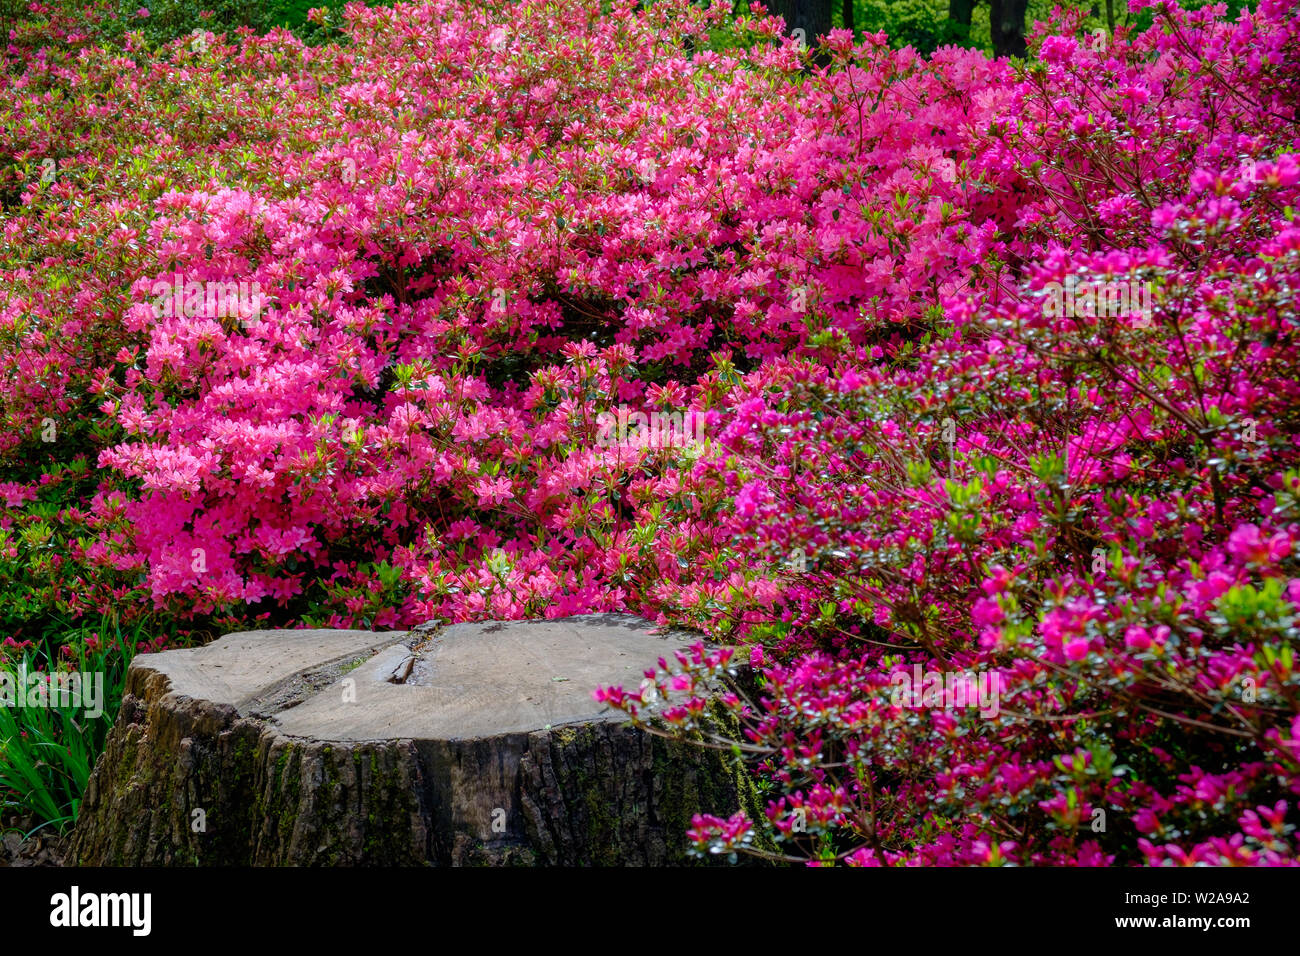 Old tree stump surrounded by pink flowers & green foliage in the Spring at Isabella Plantation, Richmond Park, Southwest London, England. Stock Photo